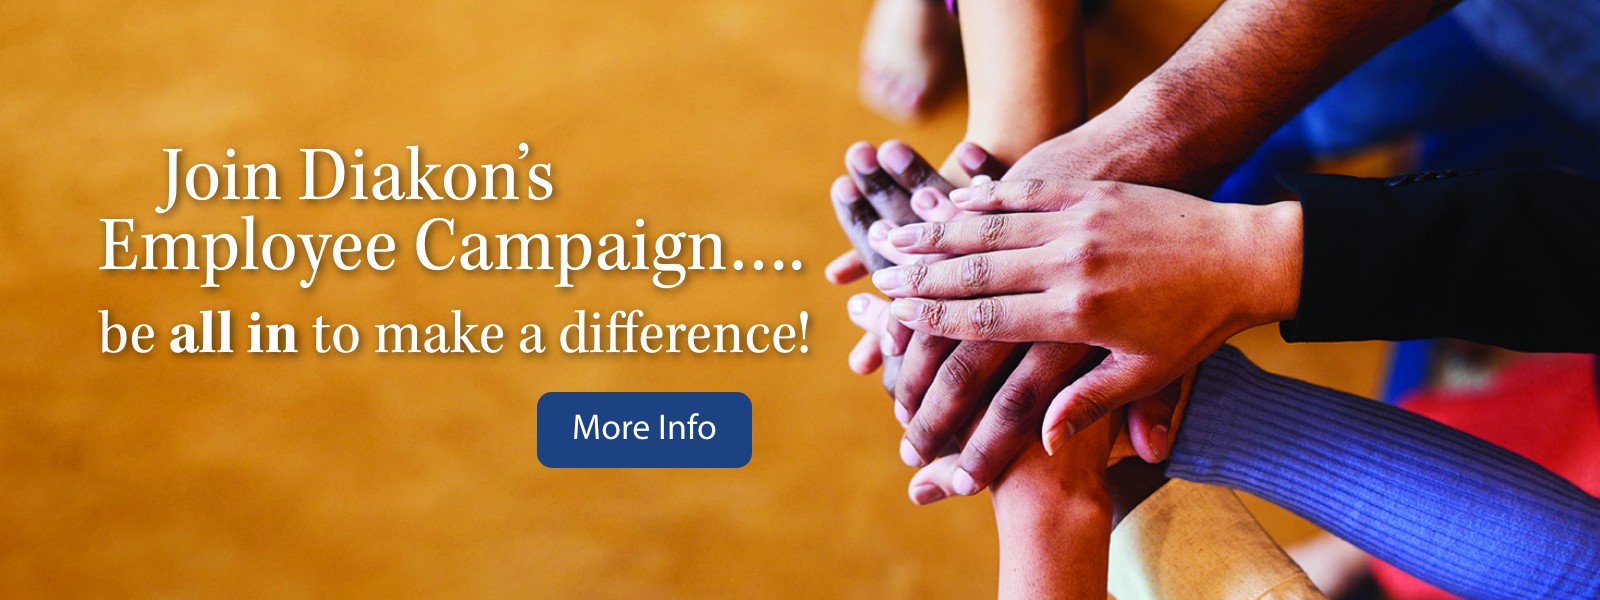 Join Diakon Employee Campaign - Be all in to make a difference!